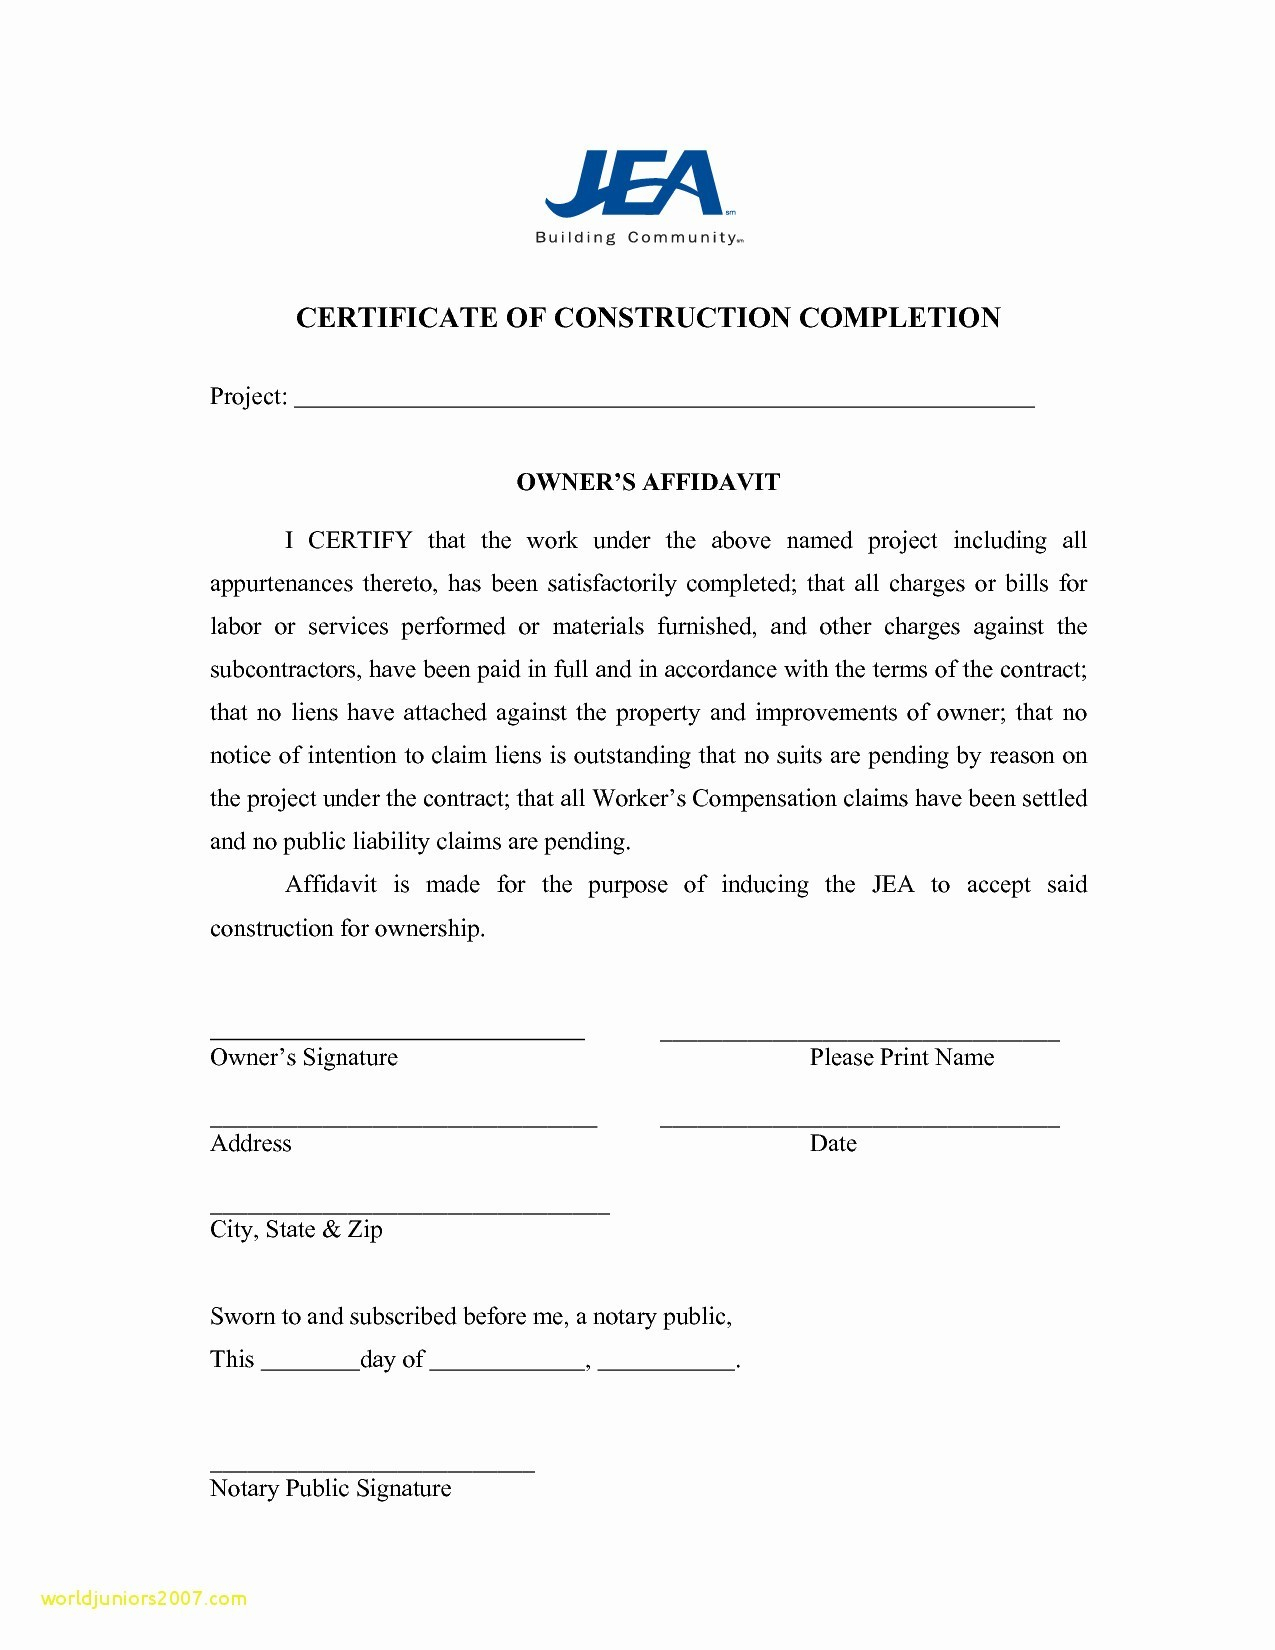 Letter Of Substantial Completion Template Examples | Letter Within Certificate Of Substantial Completion Template